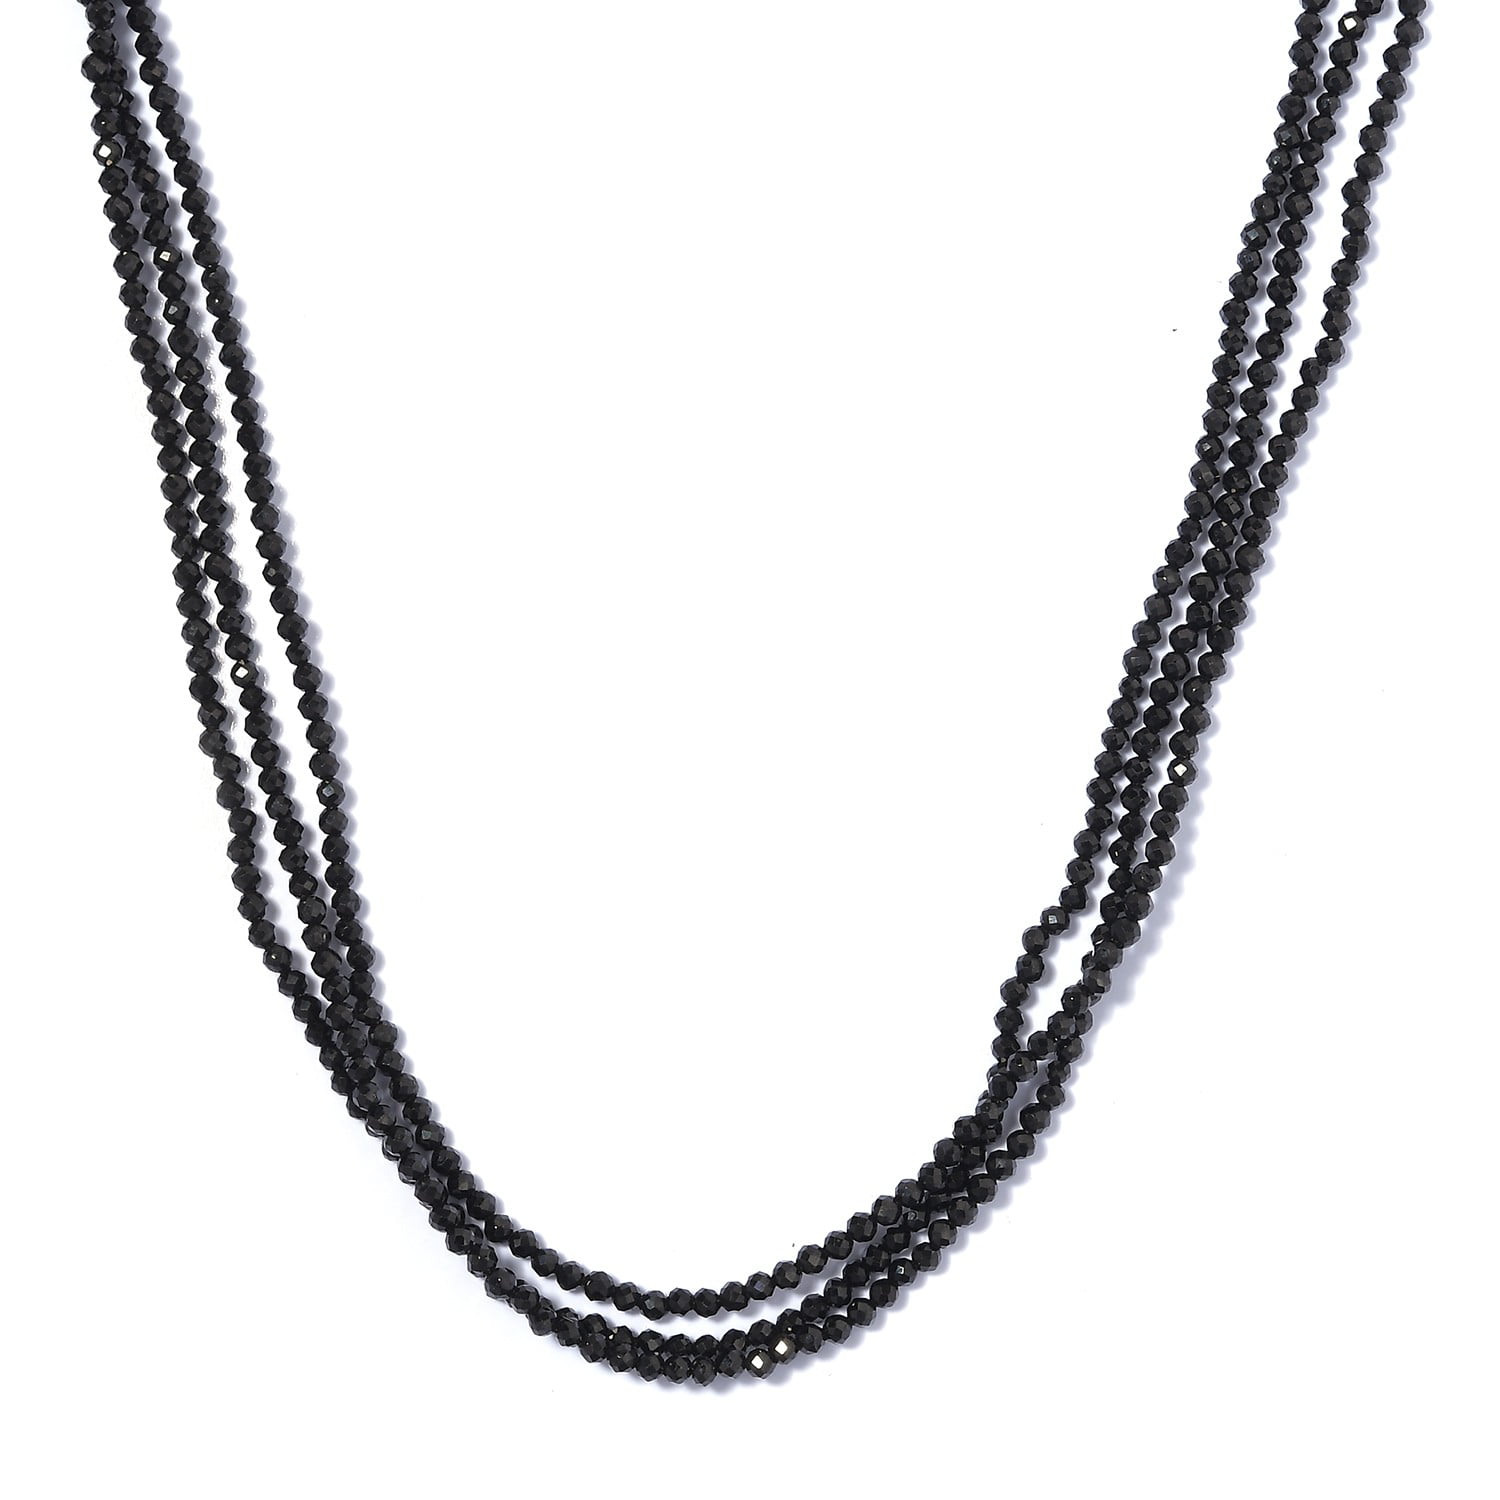 Details about   925 Silver Black Spinel Bead Strand Necklace Jewelry Women Handmade USA SELLER